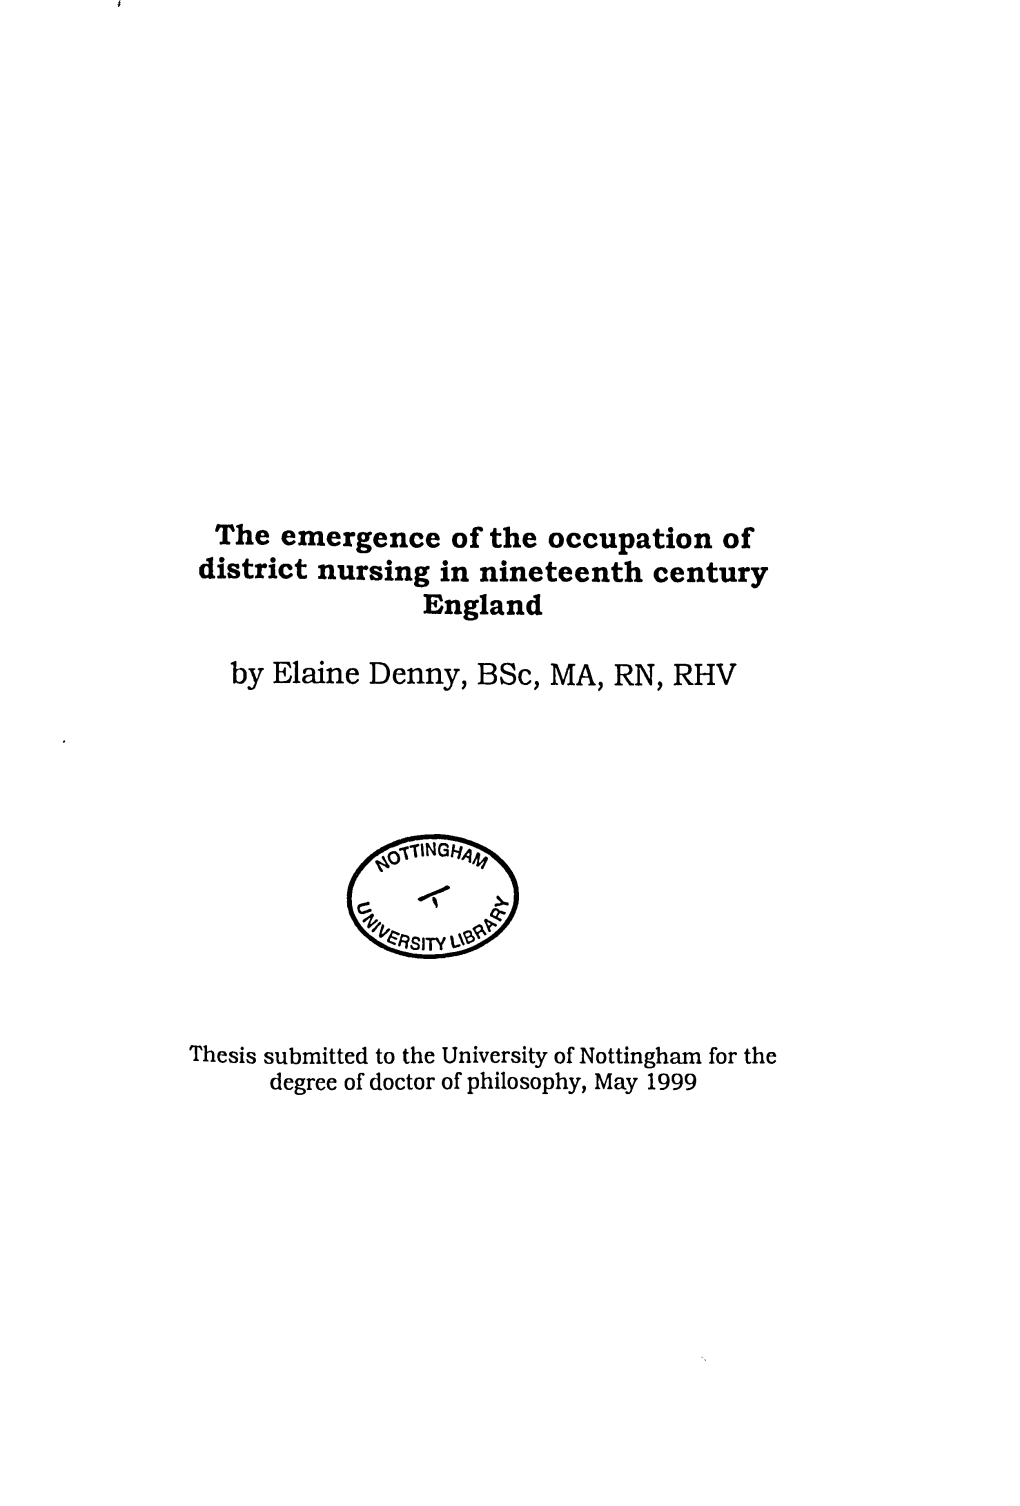 The Emergence of the Occupation of District Nursing in Nineteenth Century England